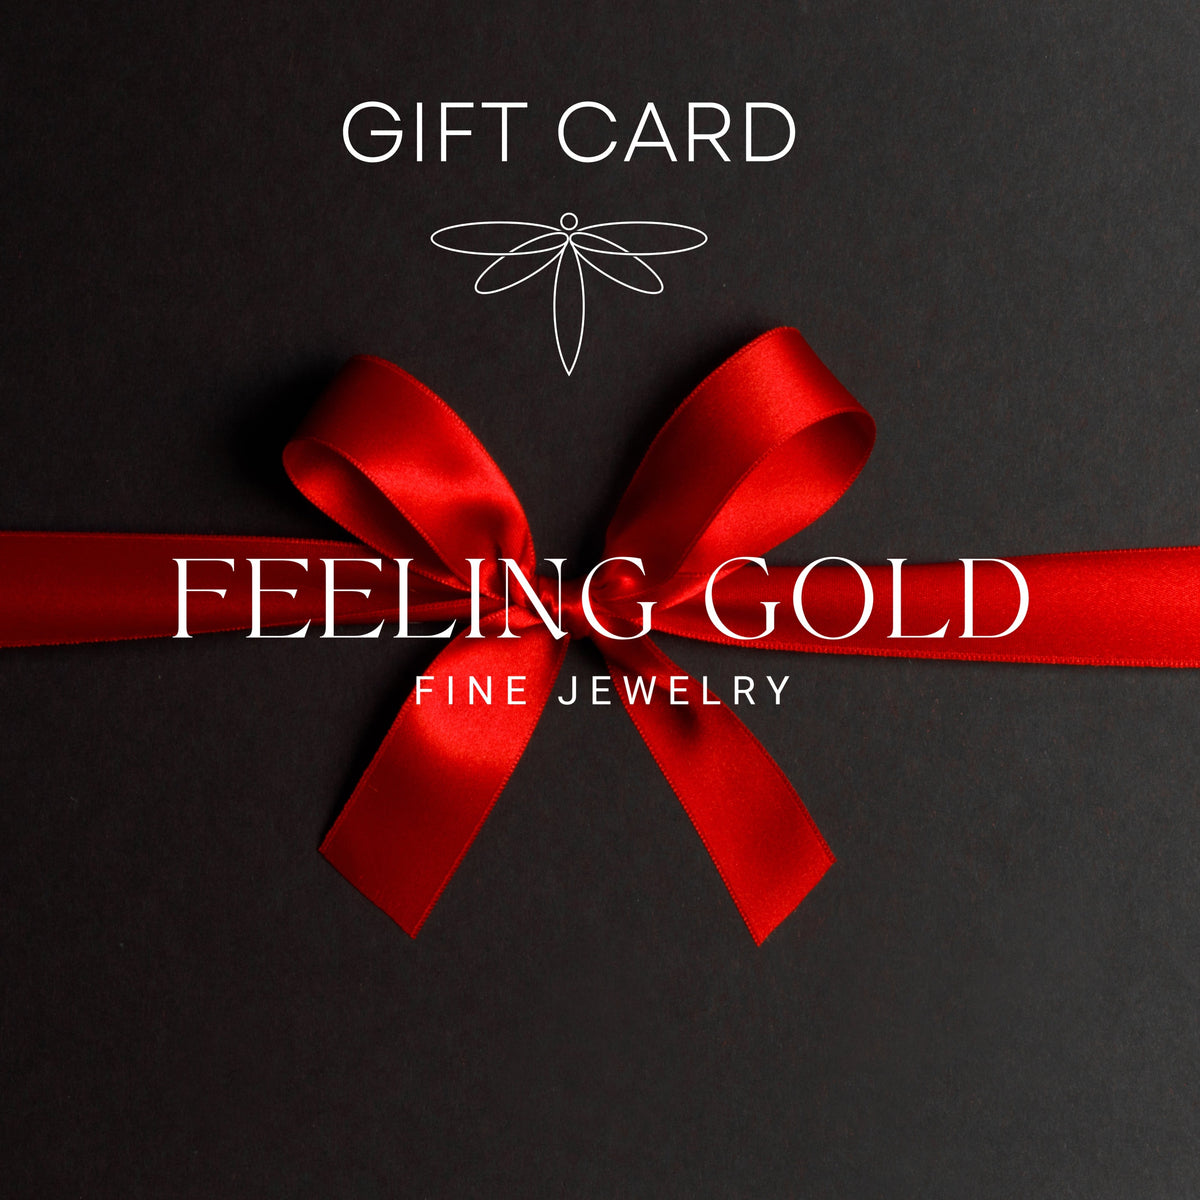 Feeling Gold Jewelry Gift Card